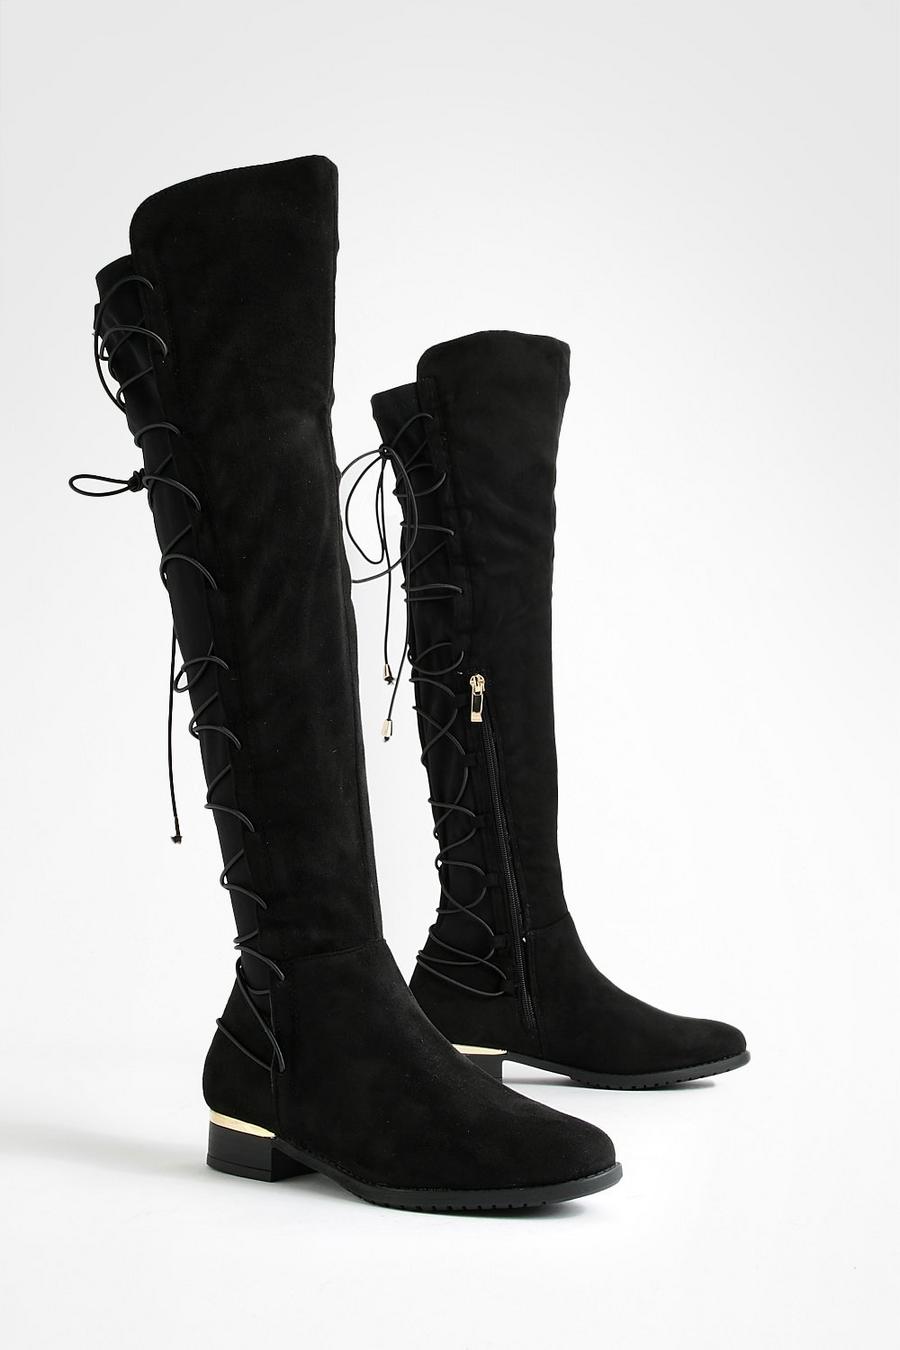 Womens Ladies Over The Knee Thigh High Long Lace Tie Up Flat Black Boots Size 